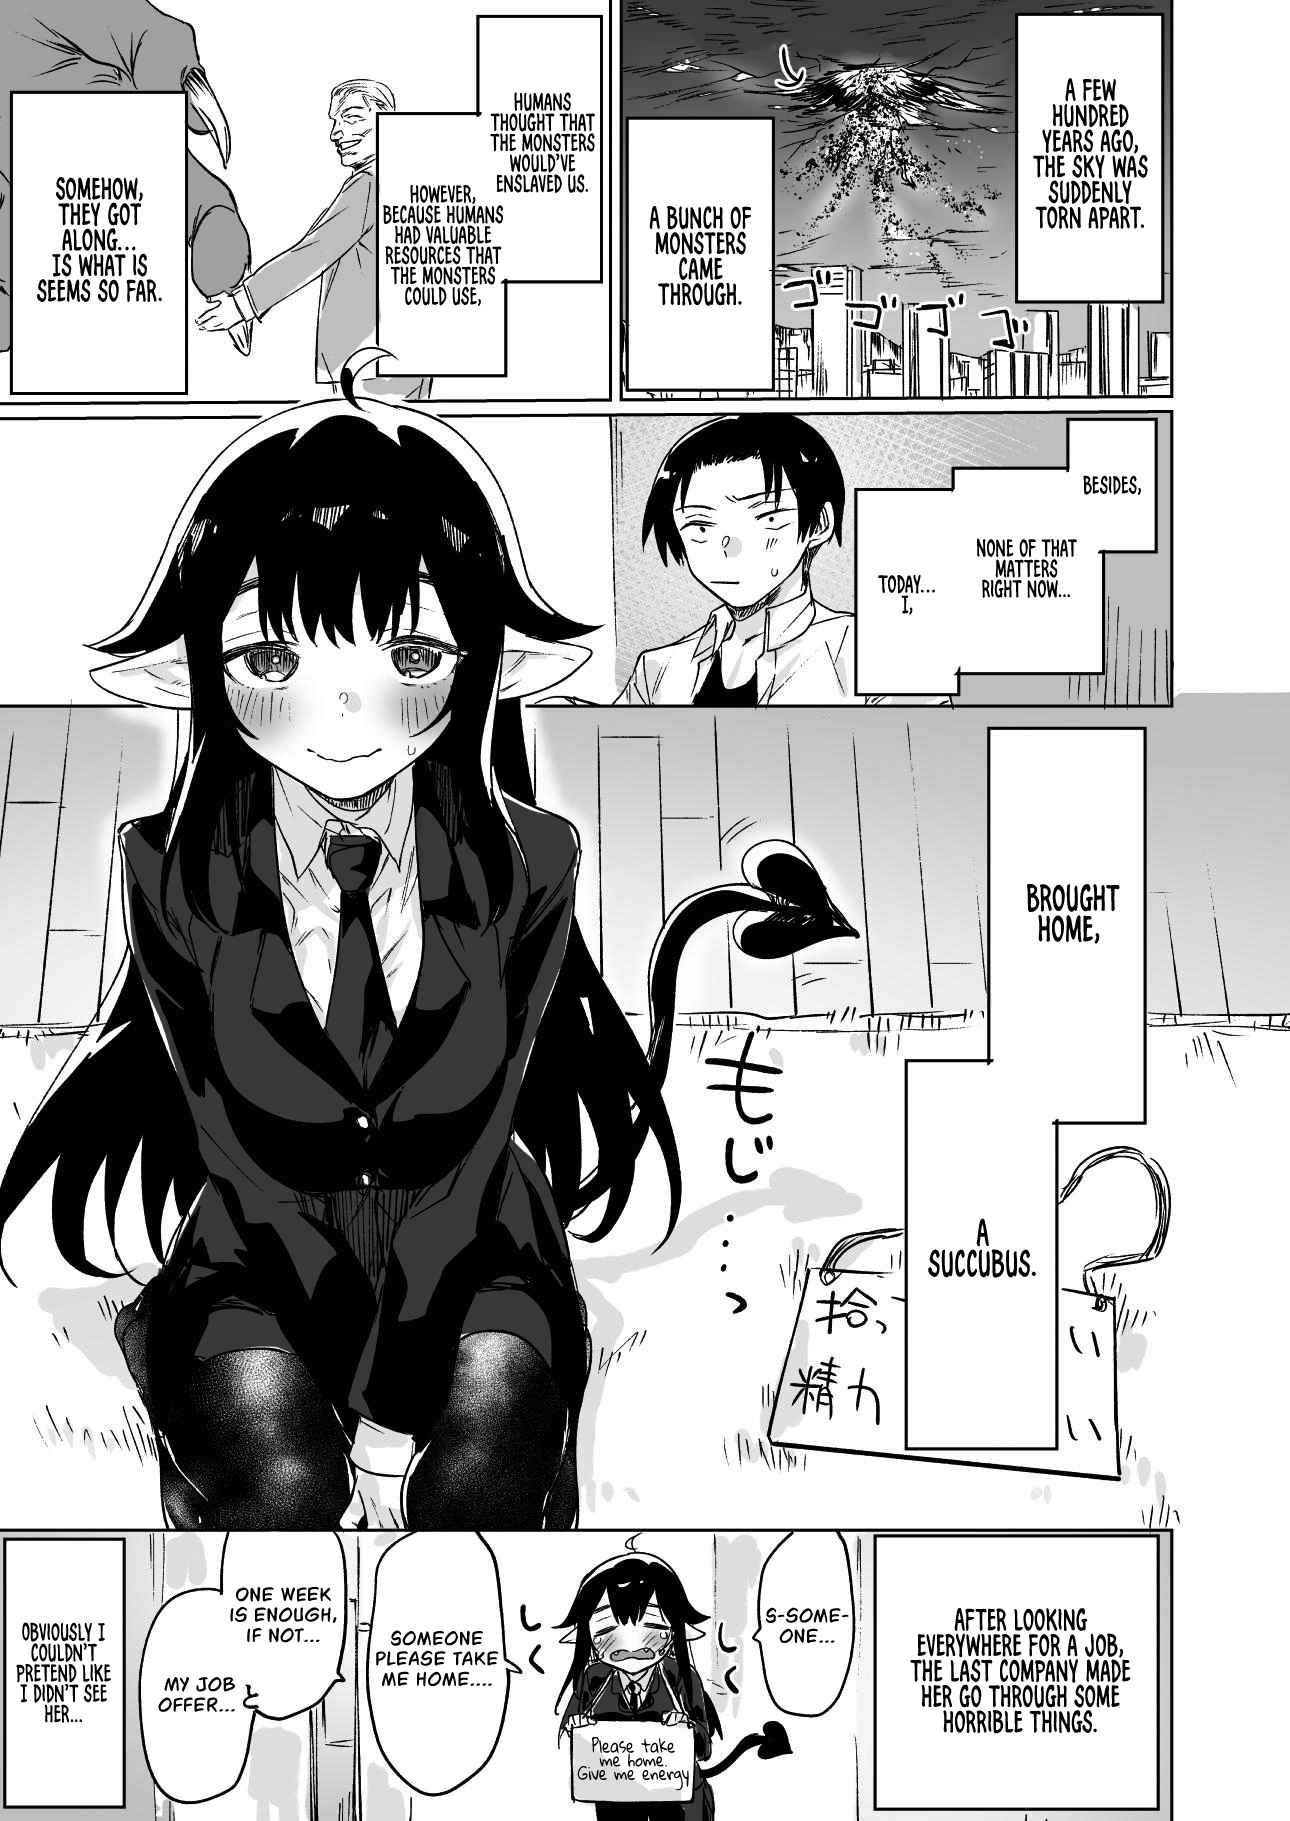 I brought home a succubus who failed to find a job. Ch. 1